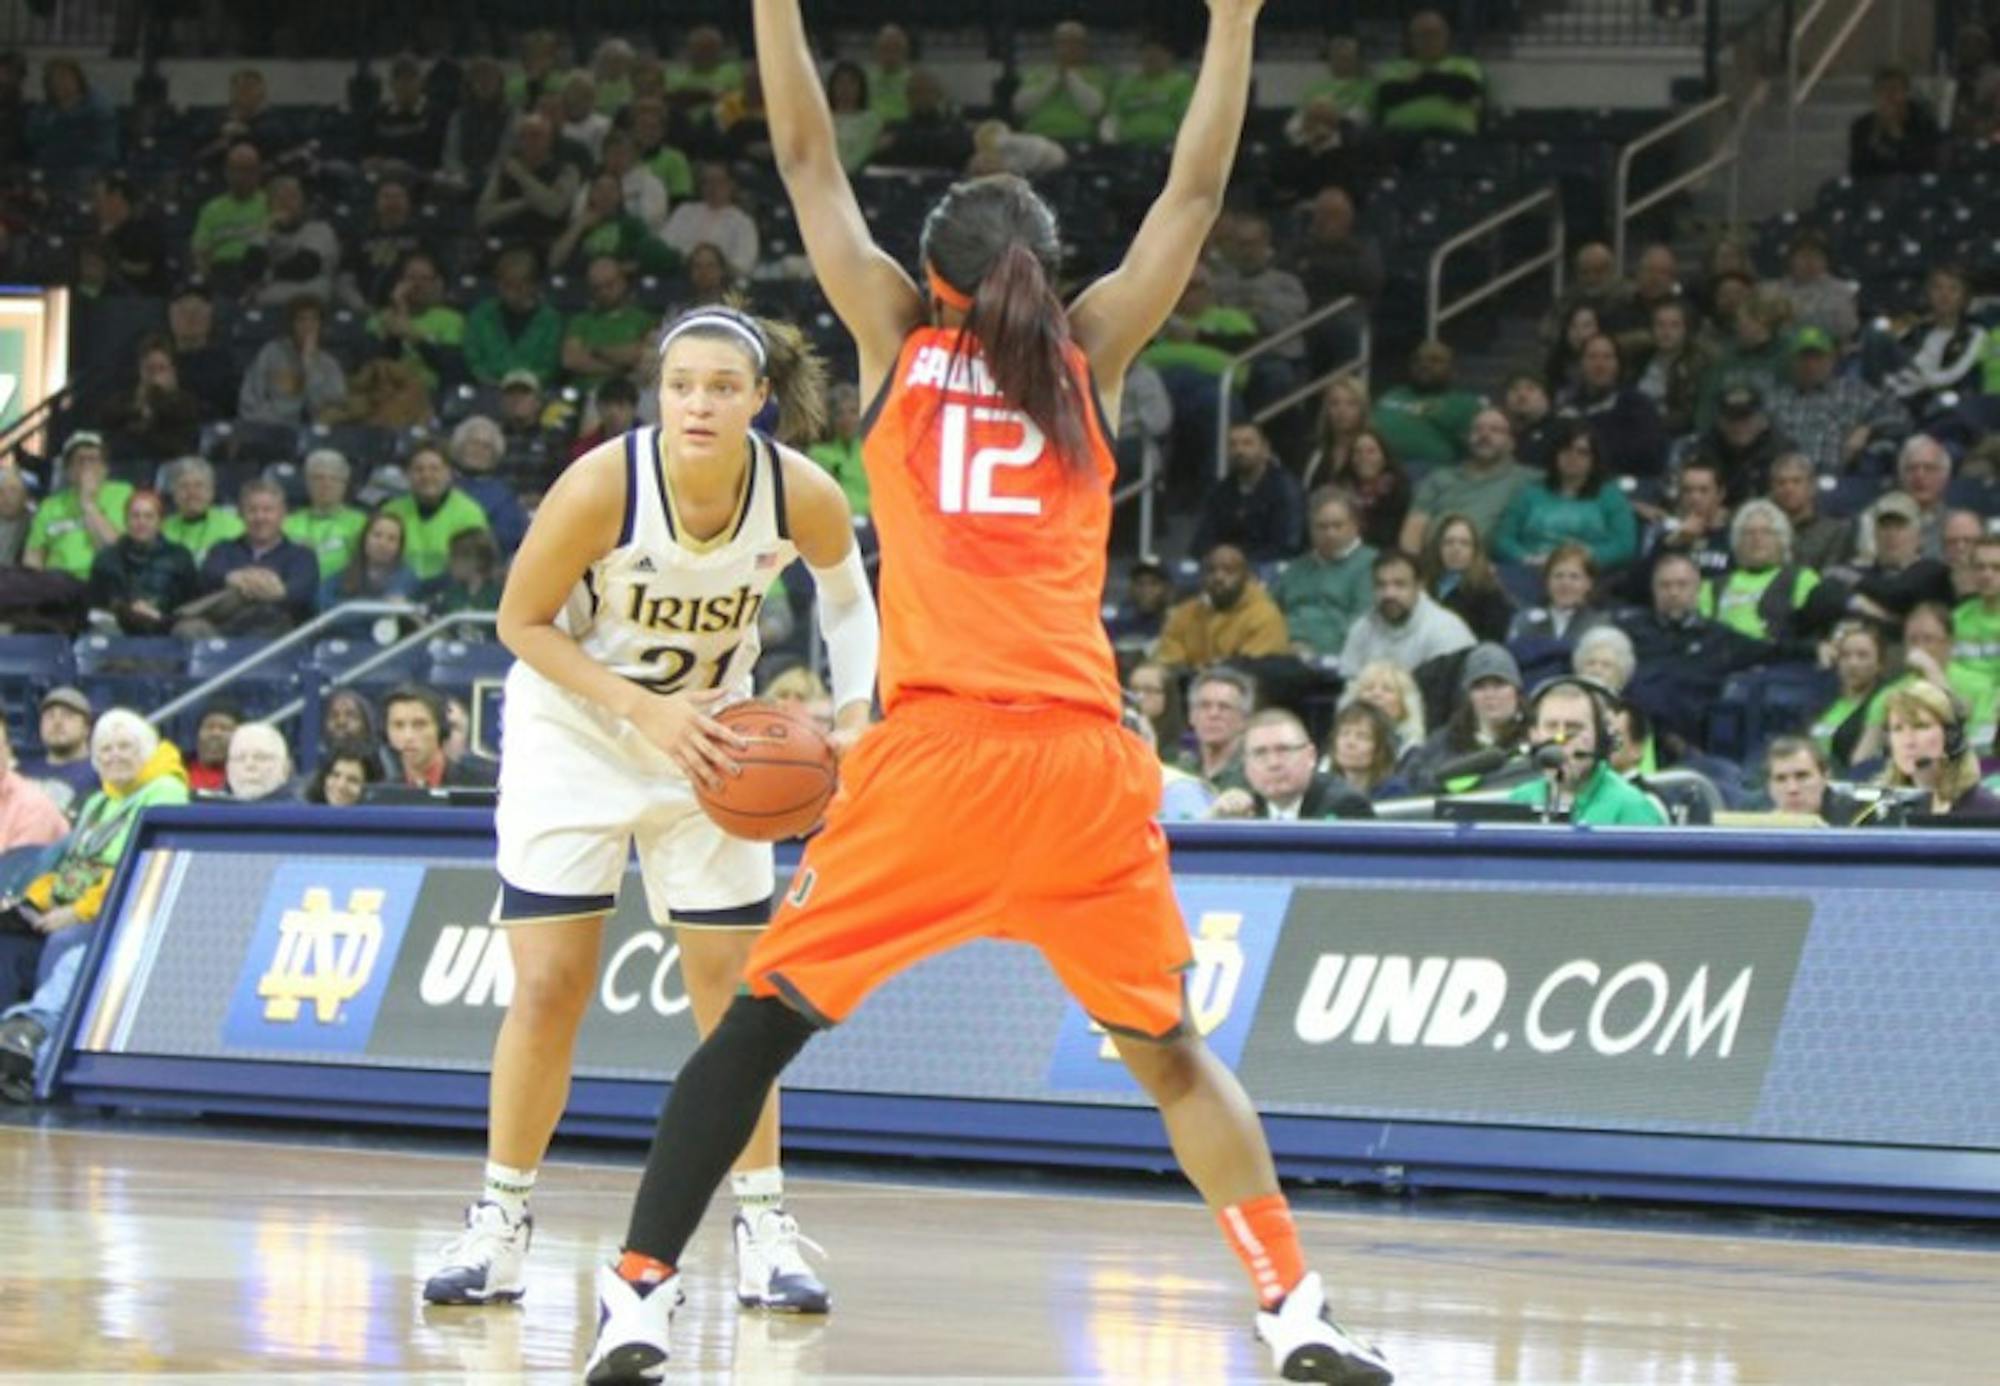 Senior forward Kayla McBride looks for a pass while defended by Miami senior guard Krystal Saunders on Jan. 23. McBride picked up a double-double with 23 points and 11 rebounds against Duke on Sunday.